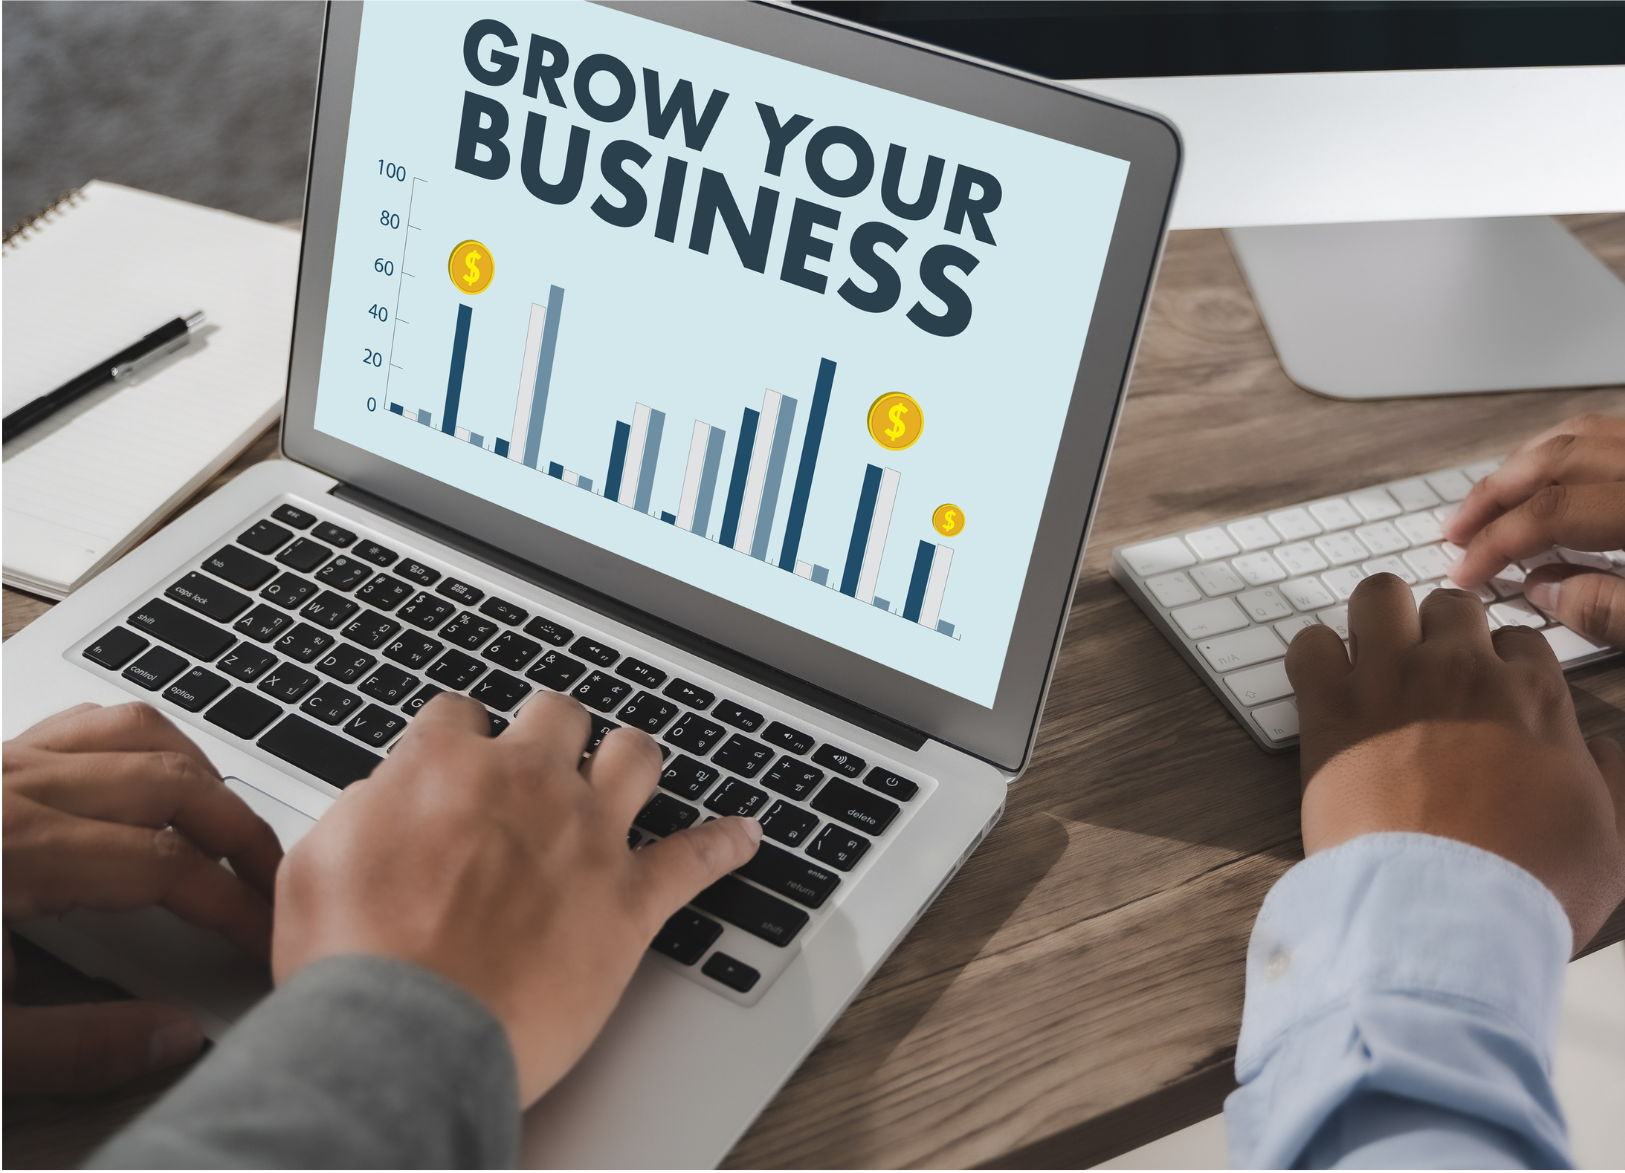 How to Grow your business